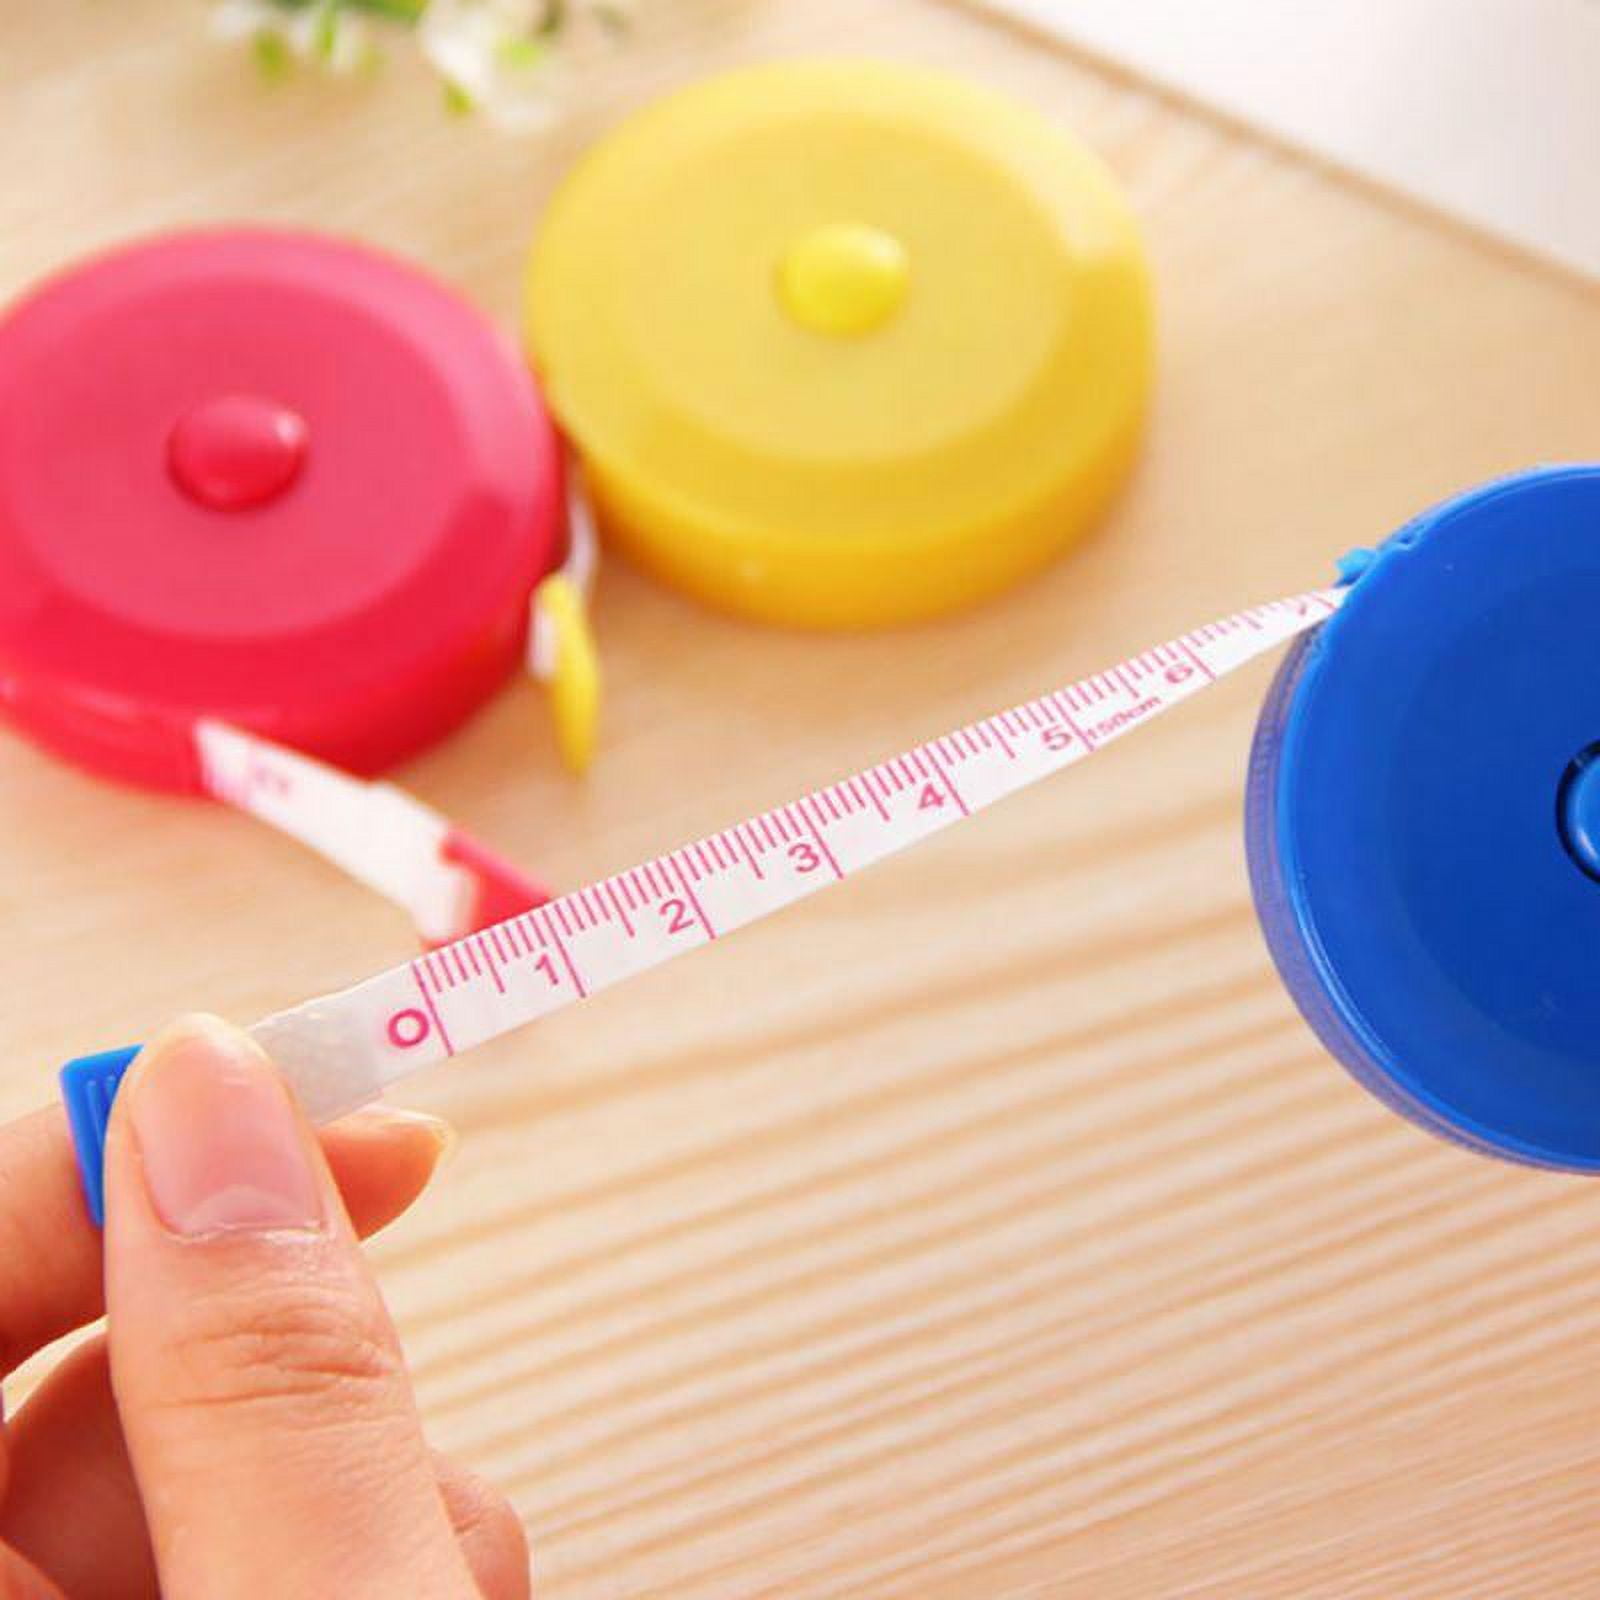 Small Air Conditioner Children's Tape Measure Toys Tapeline Kids Learning  Plastic Double Sided Ruler - AliExpress